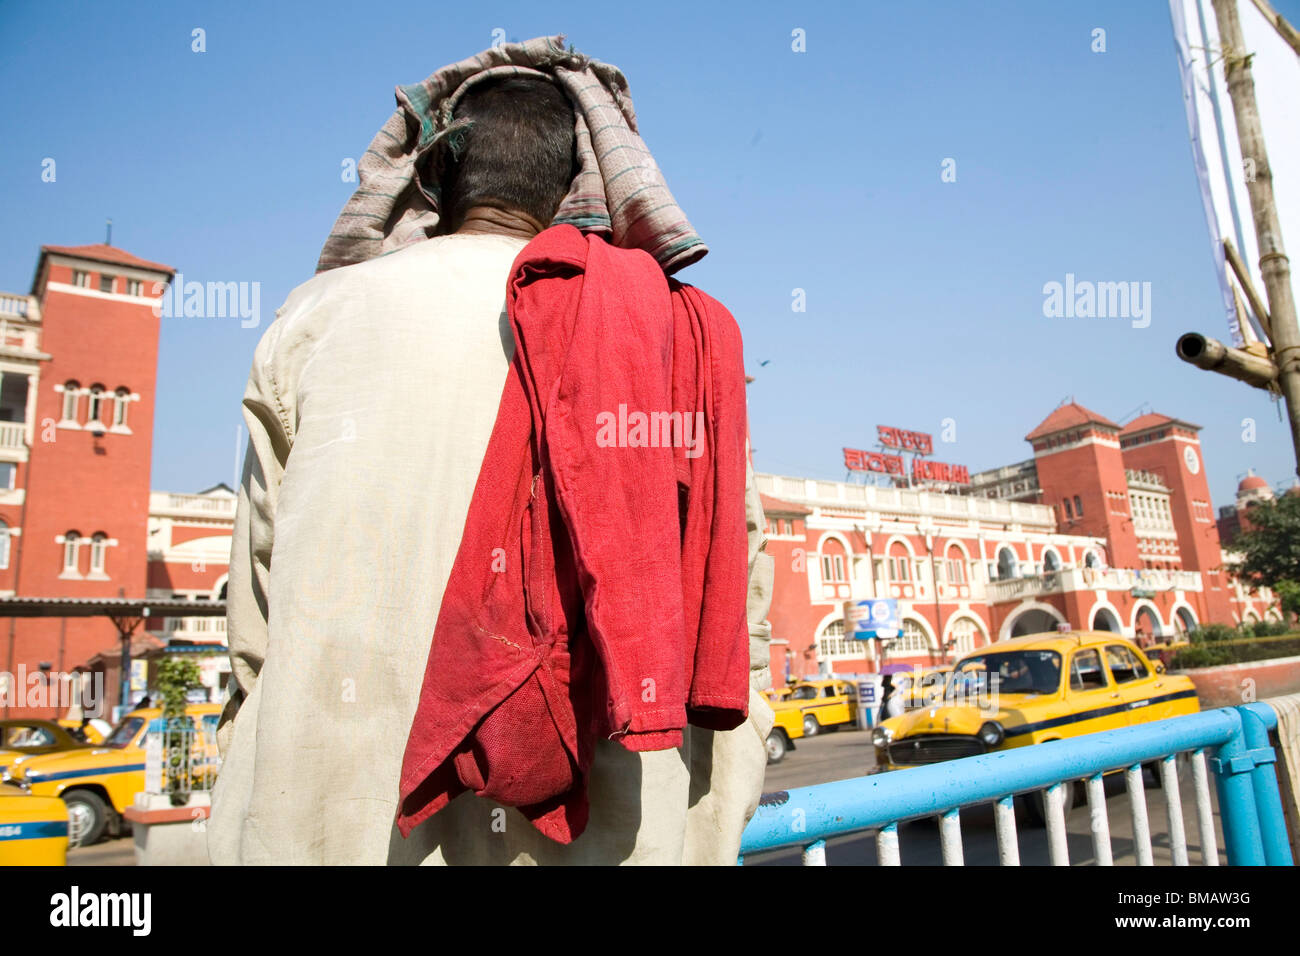 Cooli or porter wearing red color dress sitting near Howrah railway station ; Calcutta now Kolkata ; West Bengal ; India Stock Photo